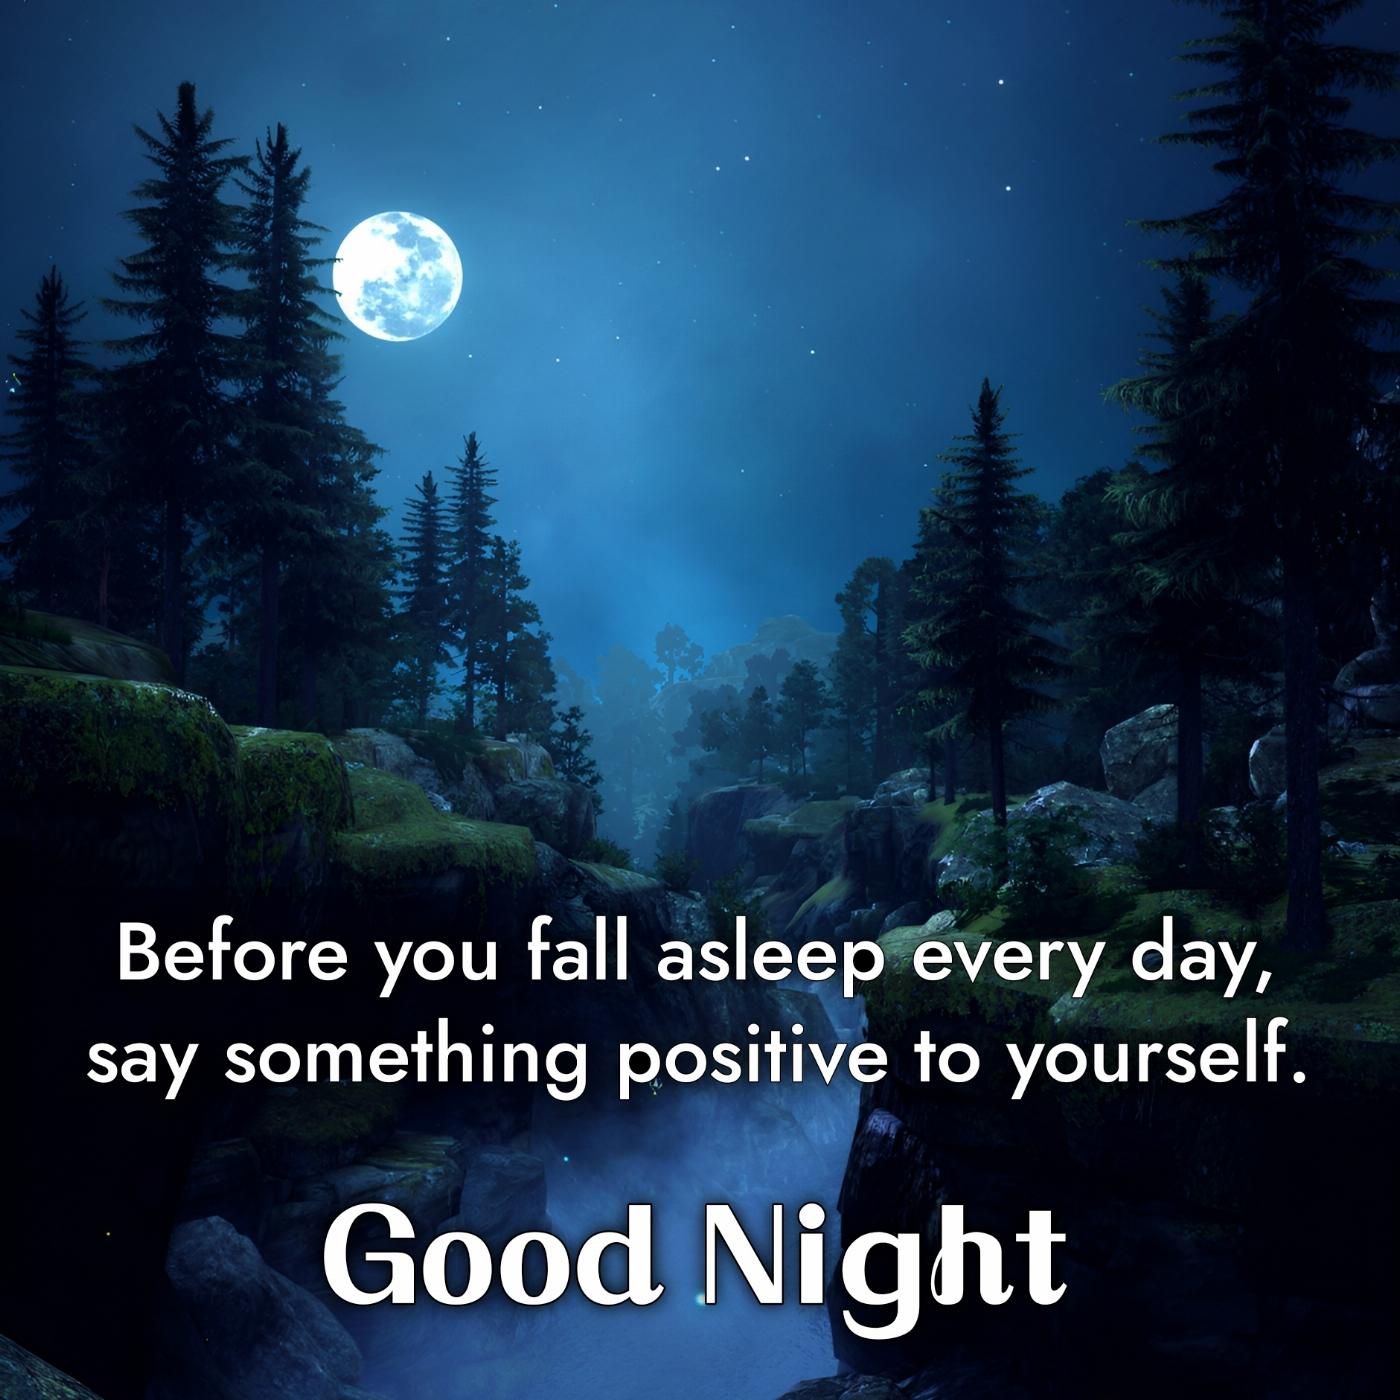 Before you fall asleep every day say something positive